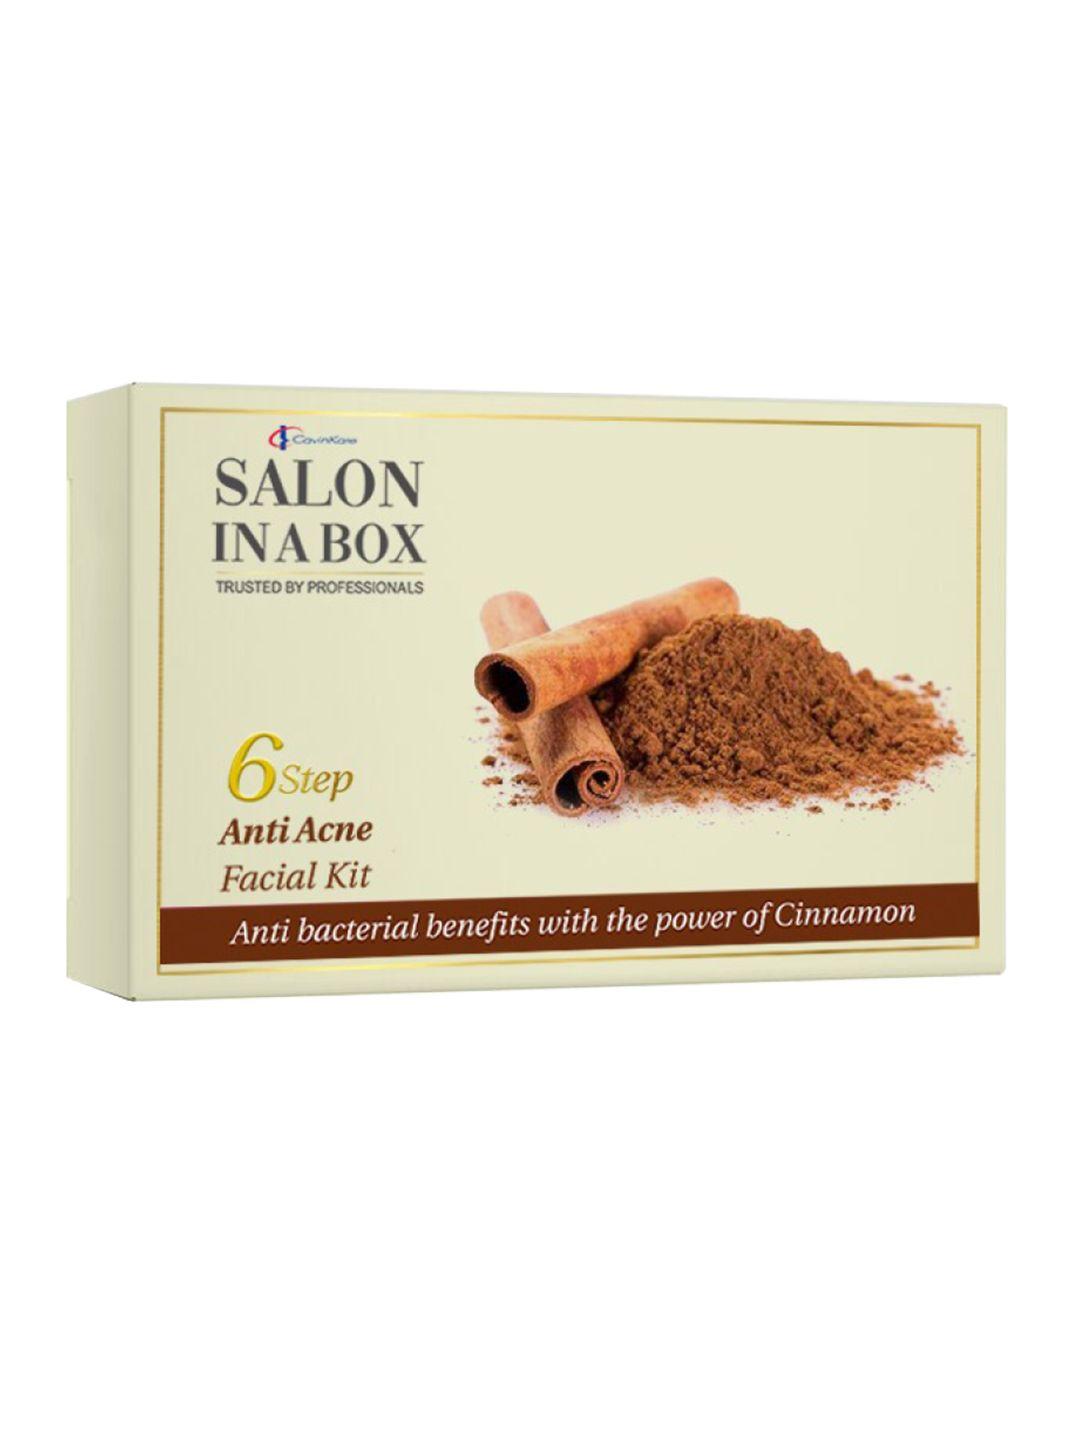 salon in a box anti acne facial kit with cinnamon extract - 59 g